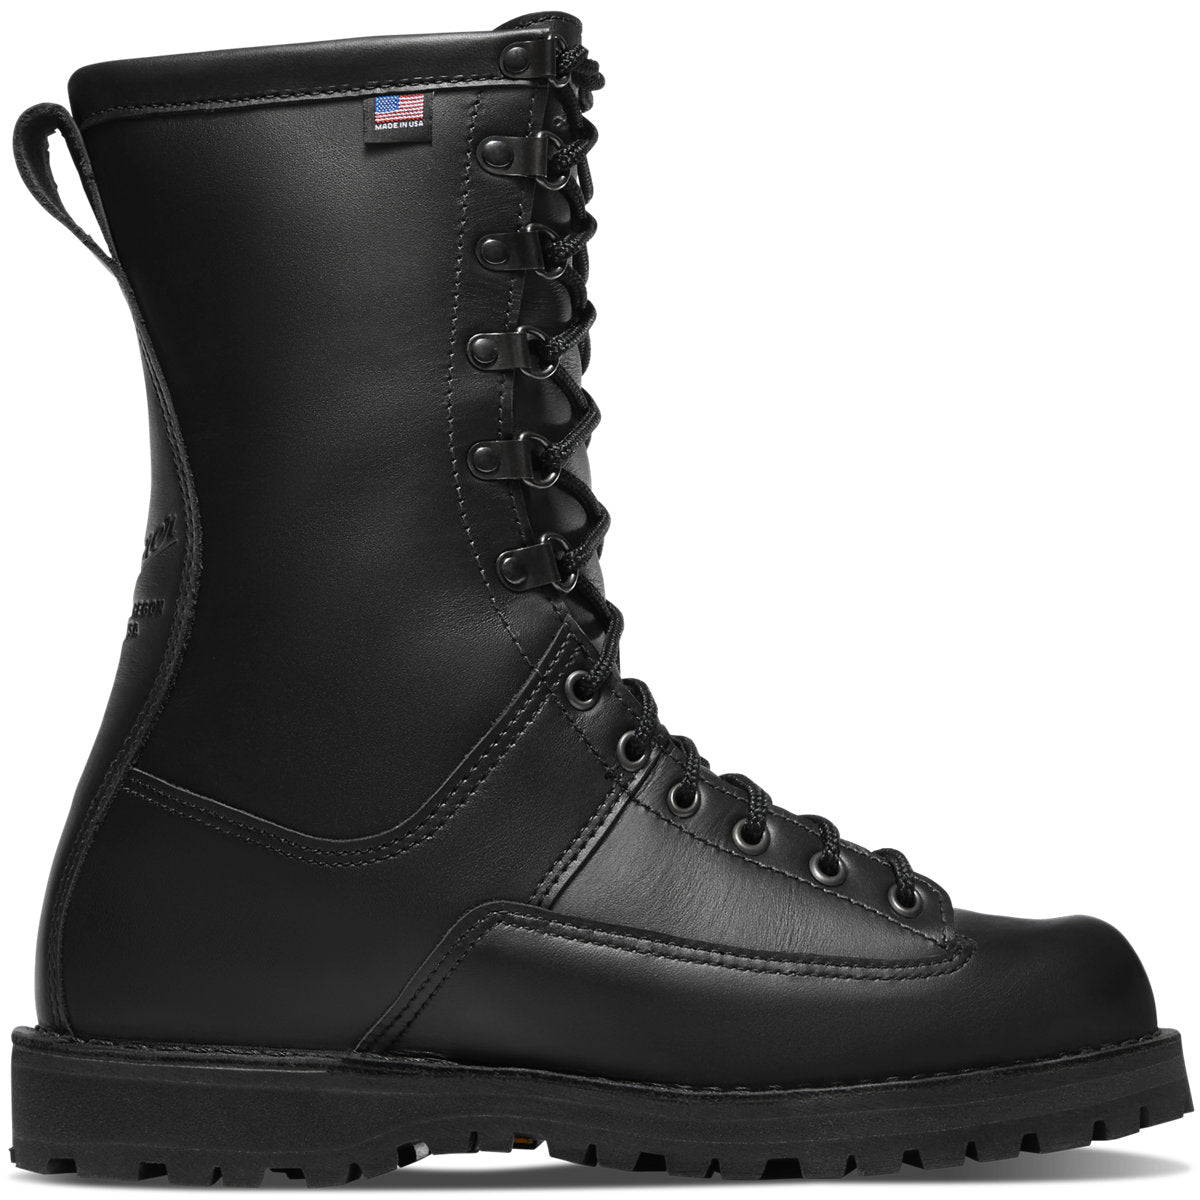 Danner Men's Fort Lewis USA Made 10" WP Duty Boot - Black - 29110  - Overlook Boots